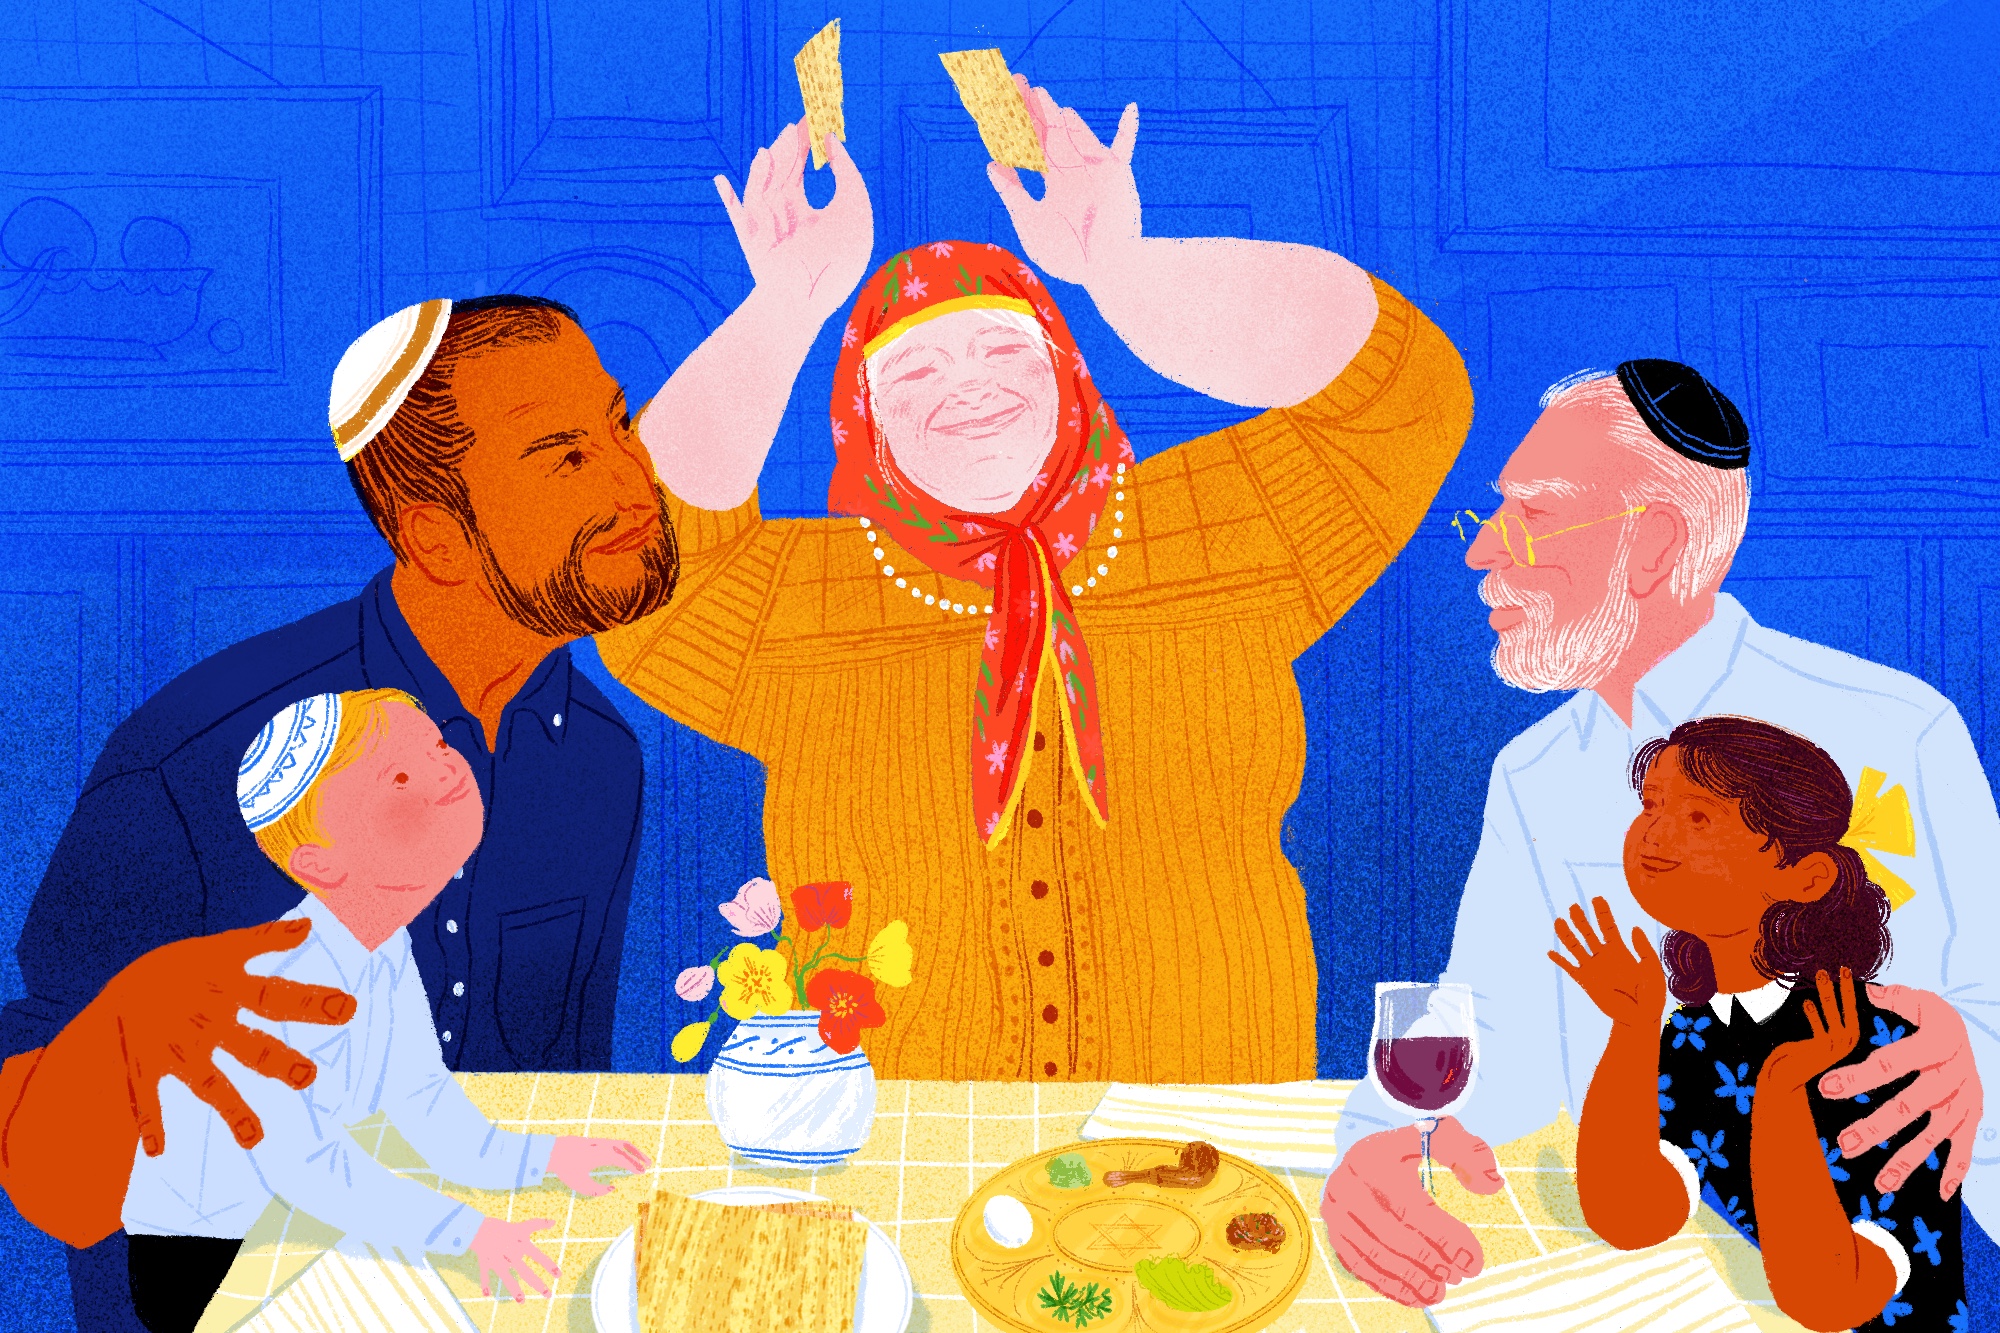 A woman at the head of the Passover seder table breaks a piece of matzo as her family looks on. Illustration.